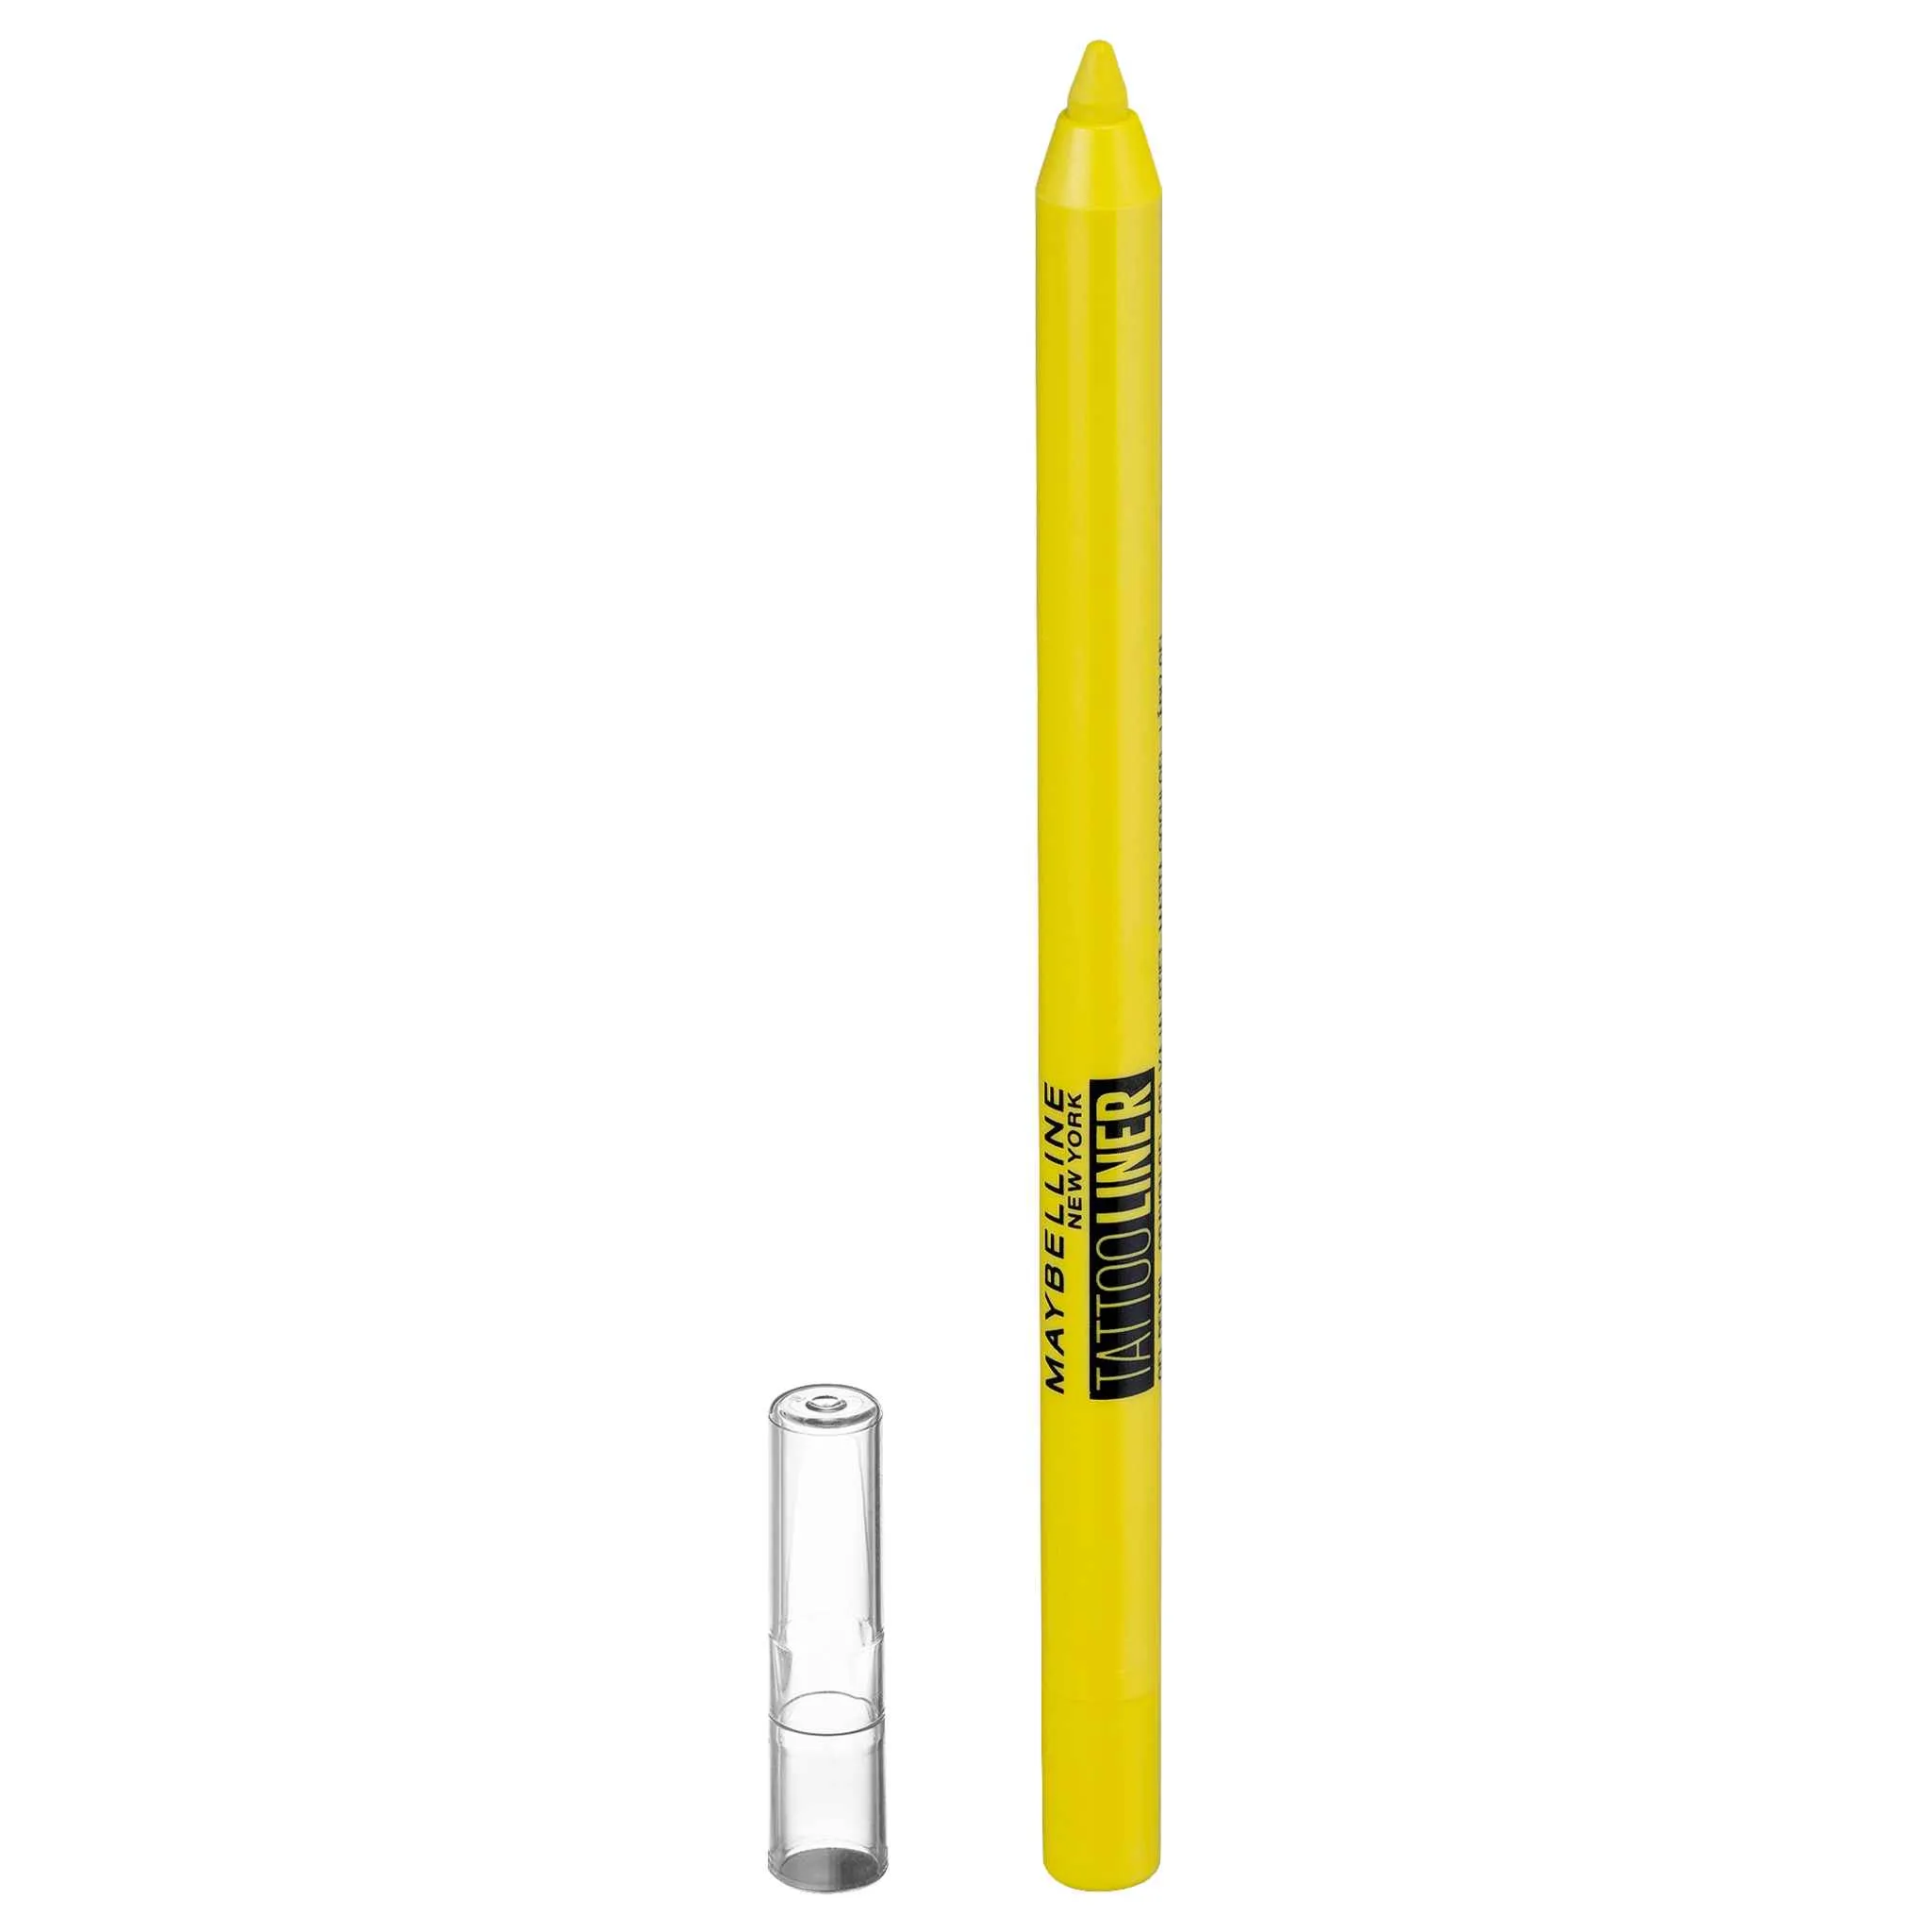 Maybelline New York Tattoo Liner Gel Pencil 304 Citrus charge